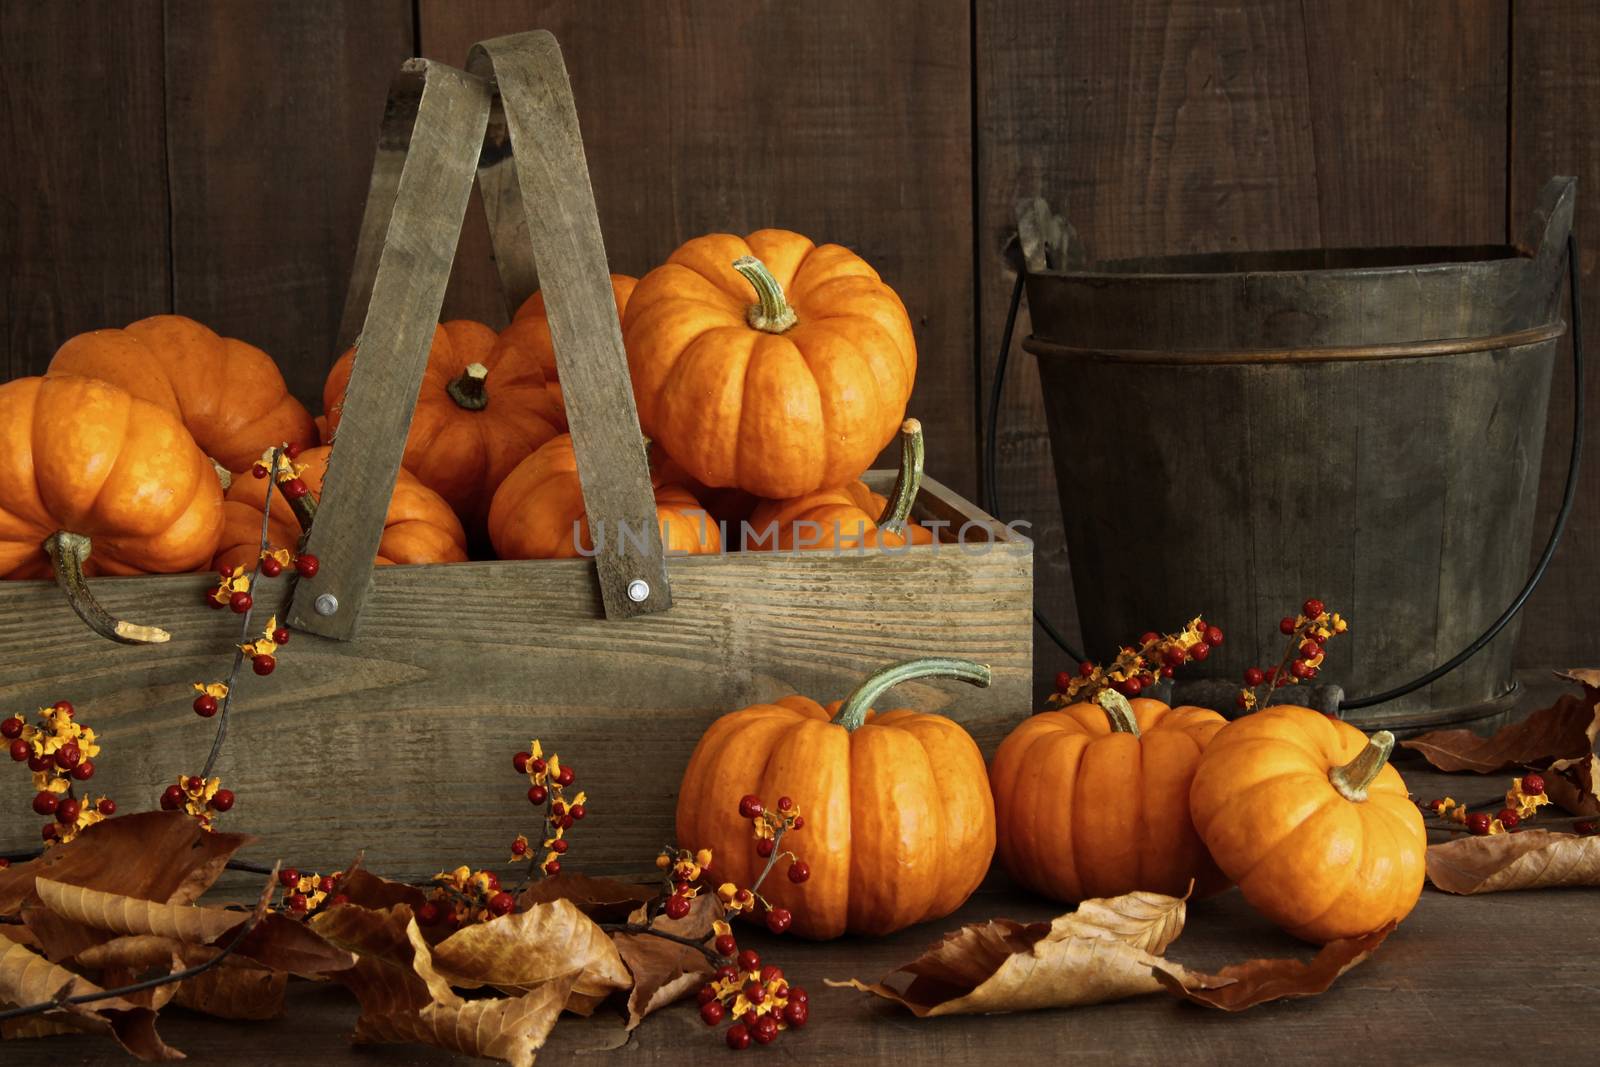 Small pumpkins in wooden box with leaves and berries